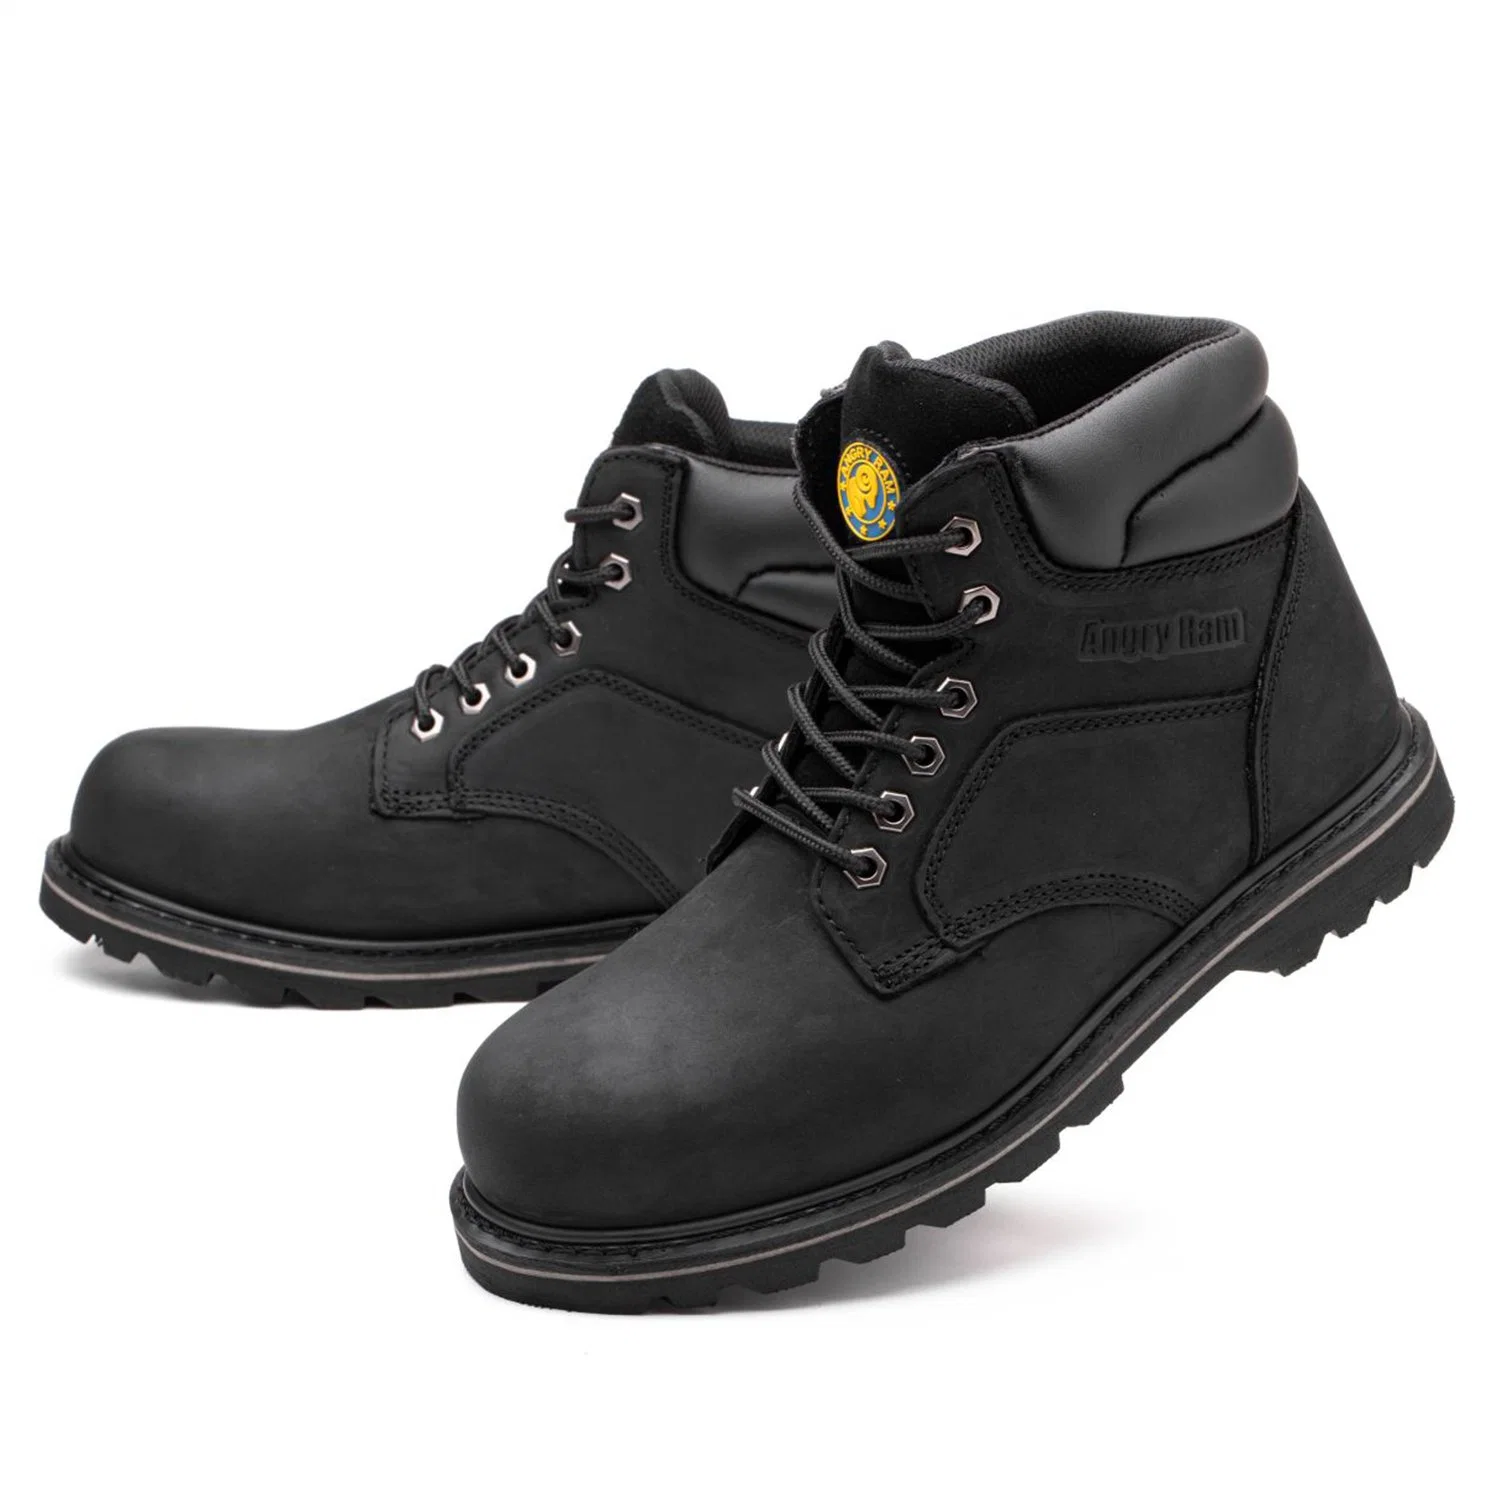 China Brand Liberty Industry Leather Safety Shoes Manufacturer